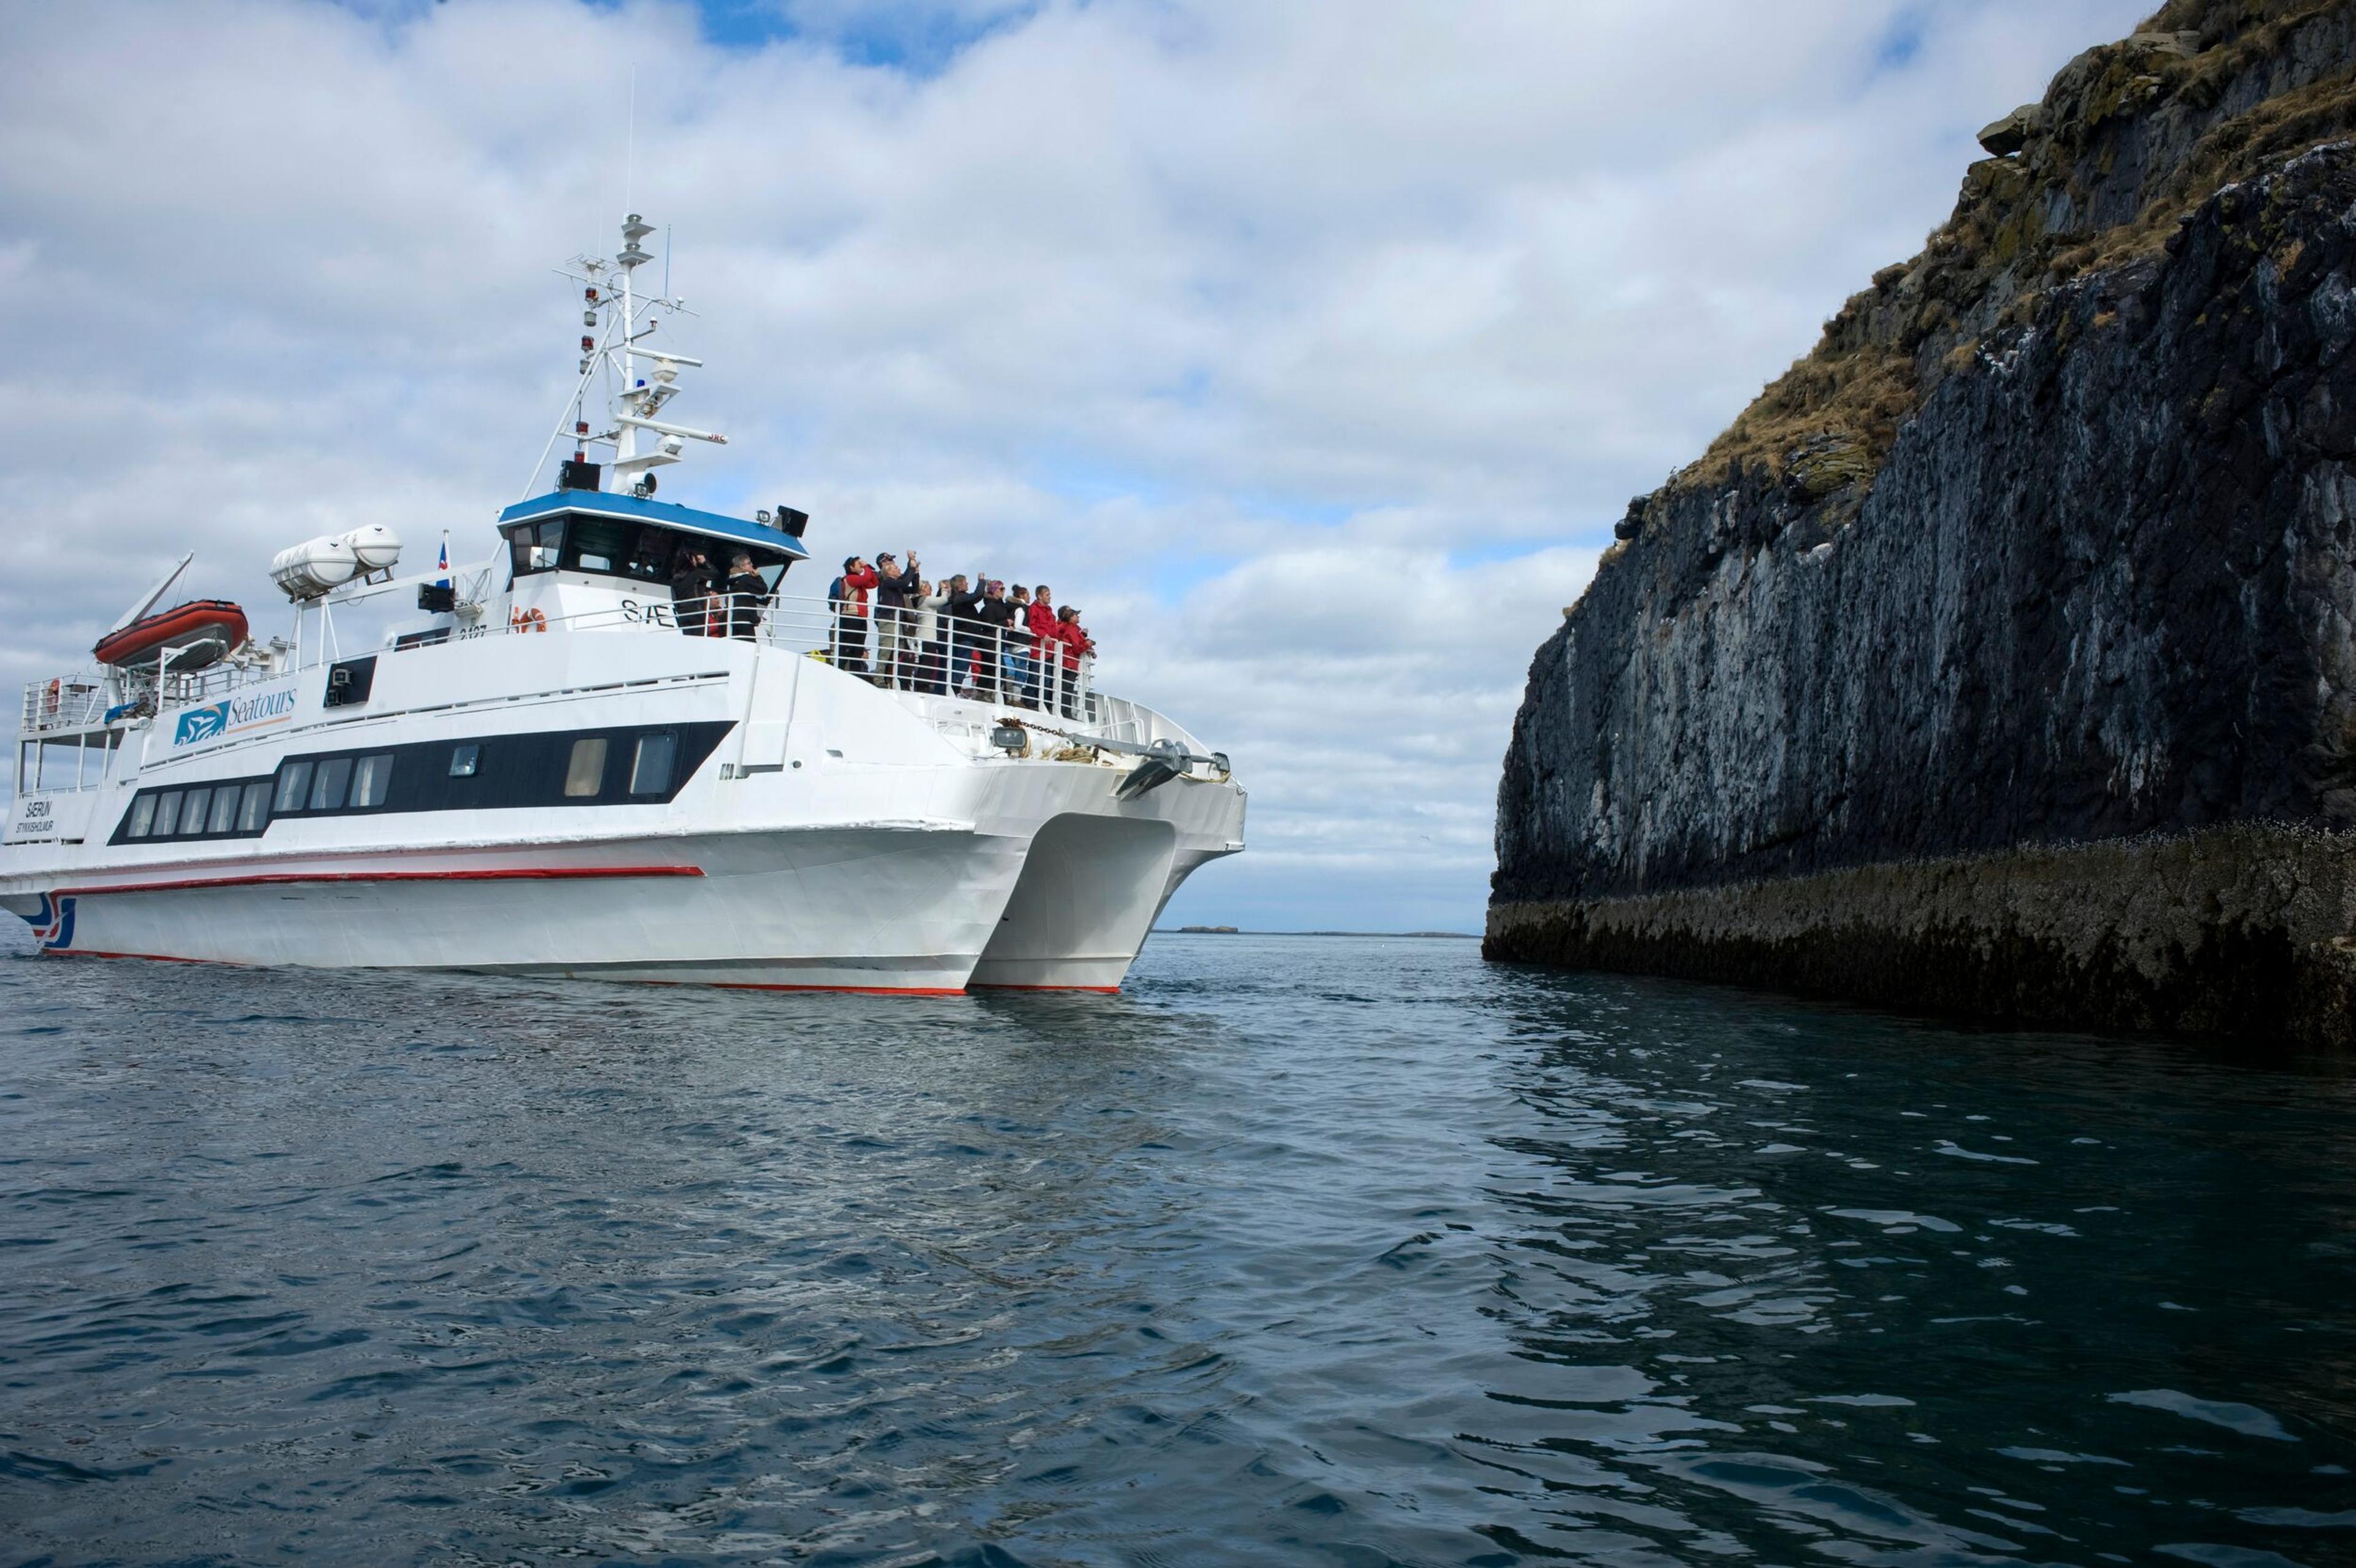 A tour boat filled with passengers navigates close to the rugged cliffs of a narrow channel, reflecting the clear waters below.